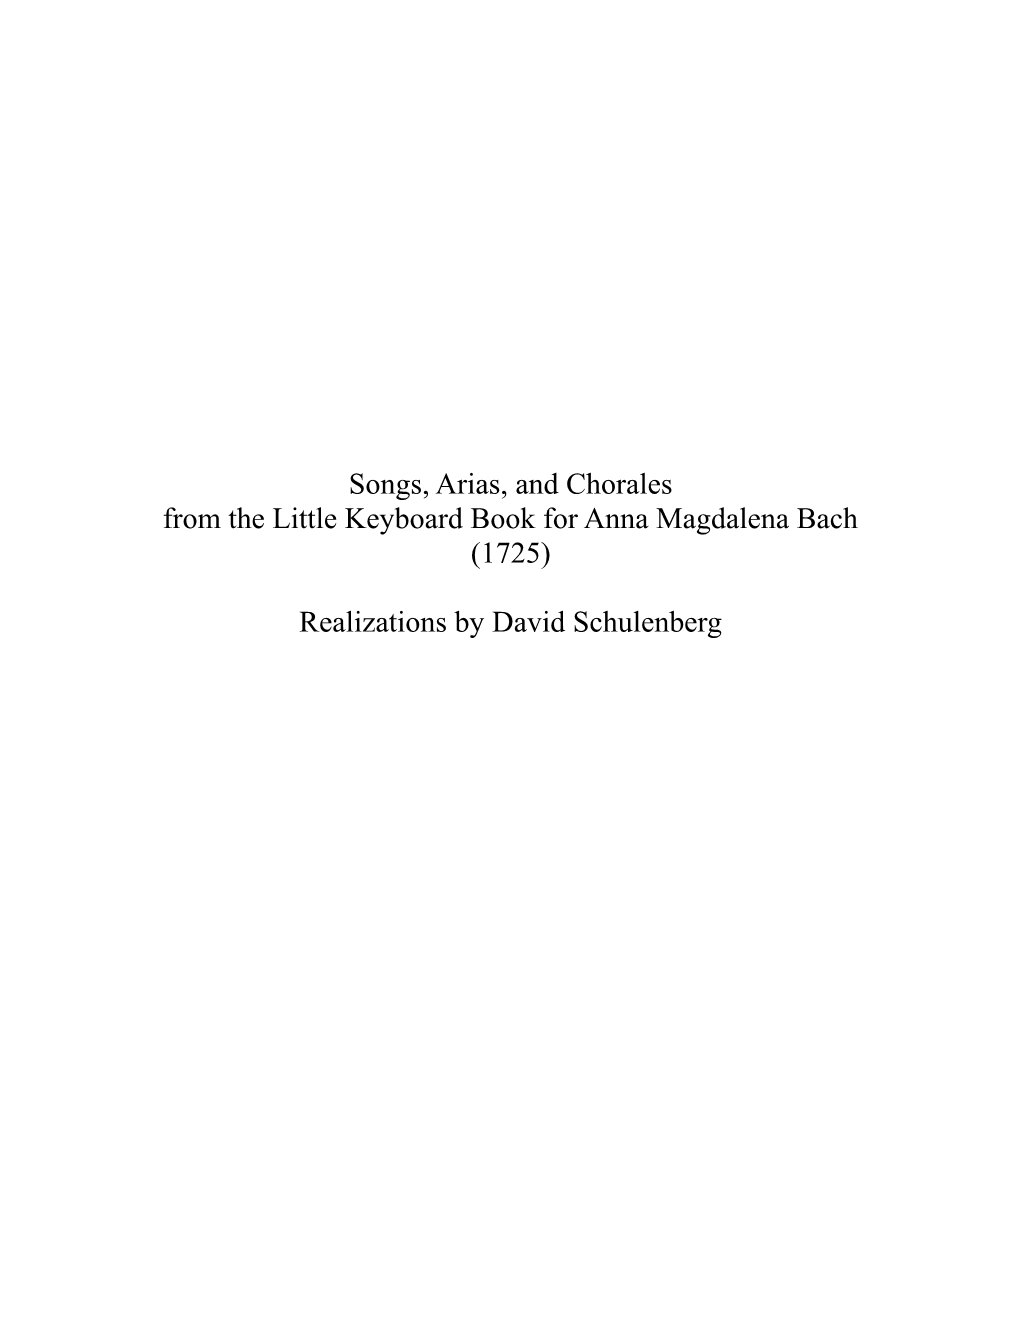 Songs, Arias, and Chorales from the Little Keyboard Book for Anna Magdalena Bach (1725) Realizations by David Schulenberg